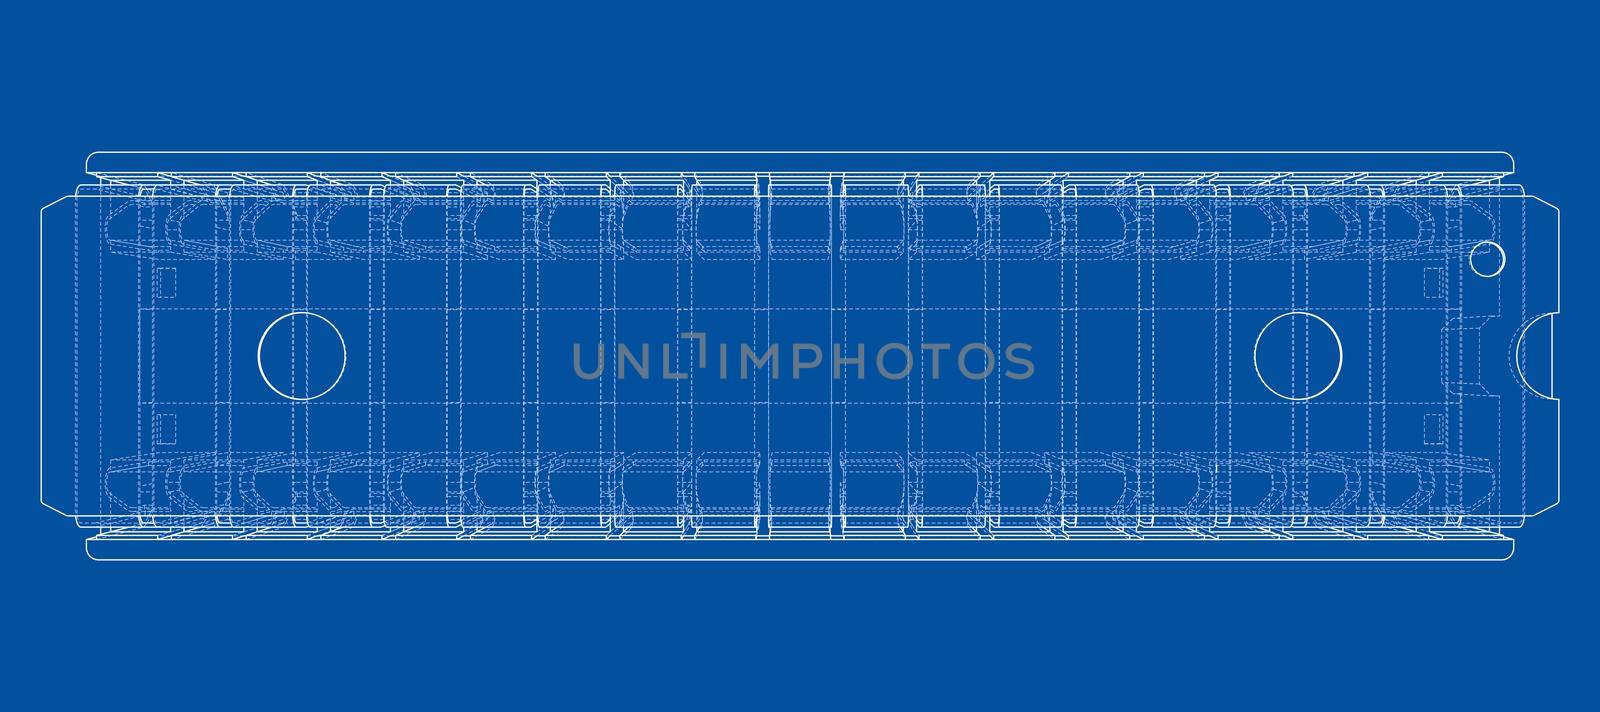 3D microchip. 3d illustration. Wire-frame or blueprint style